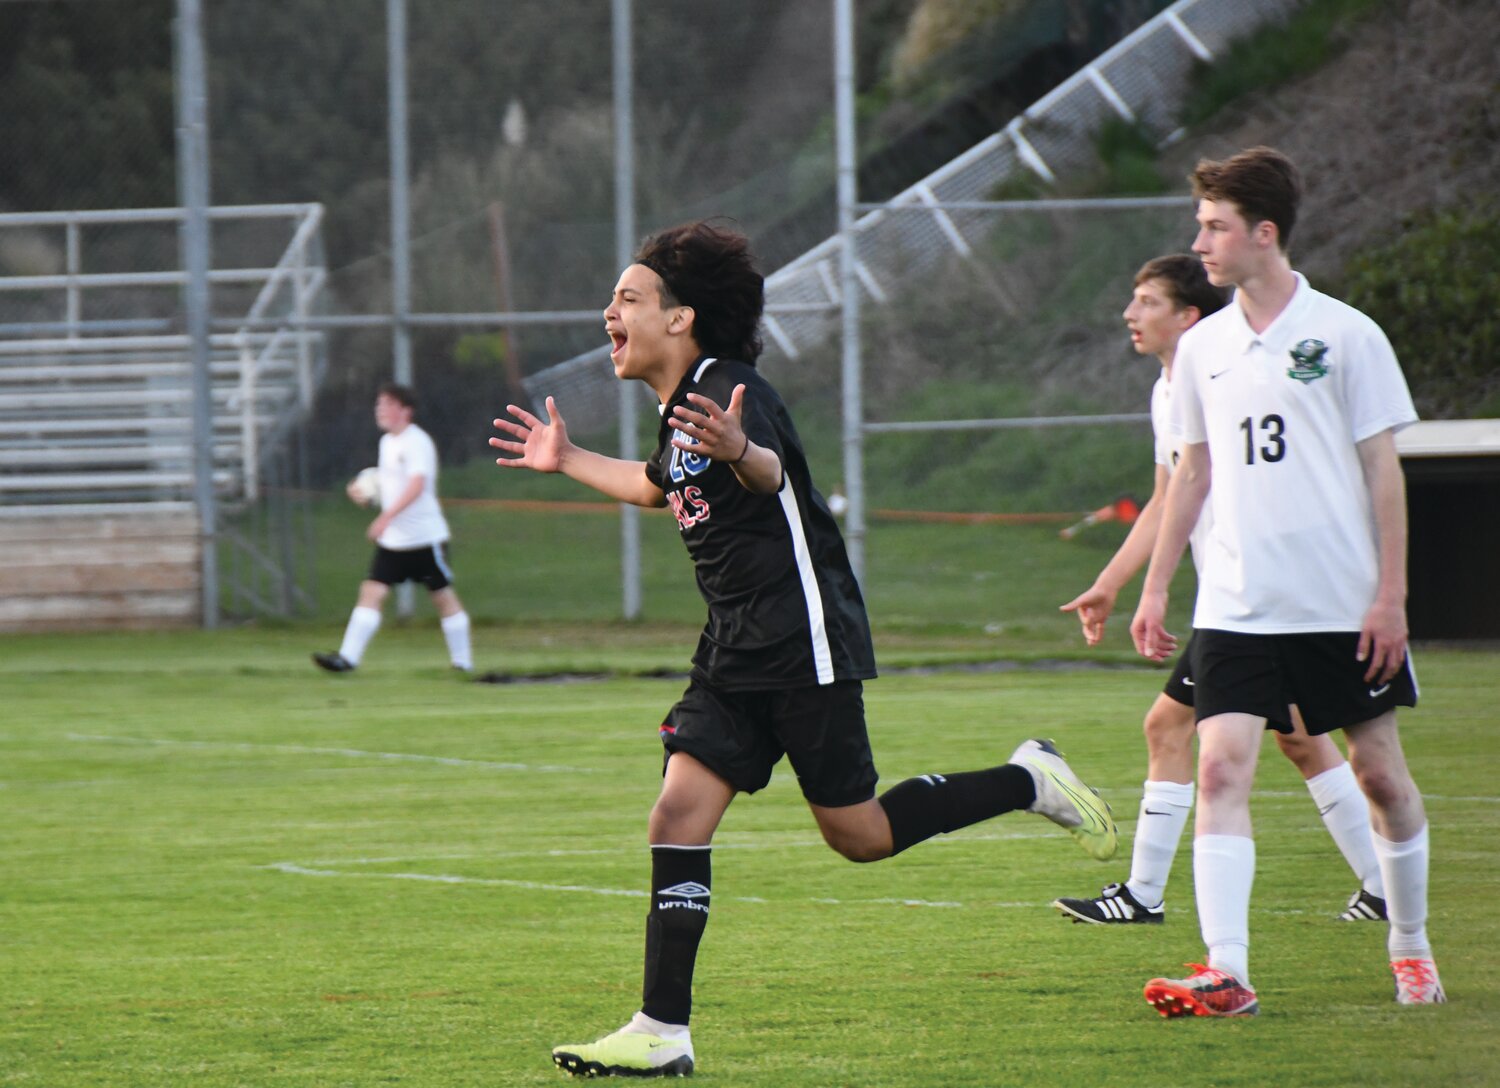 Freshman winger Armando Sanchez screams in celebration following his perfectly-aimed header goal in the first half.